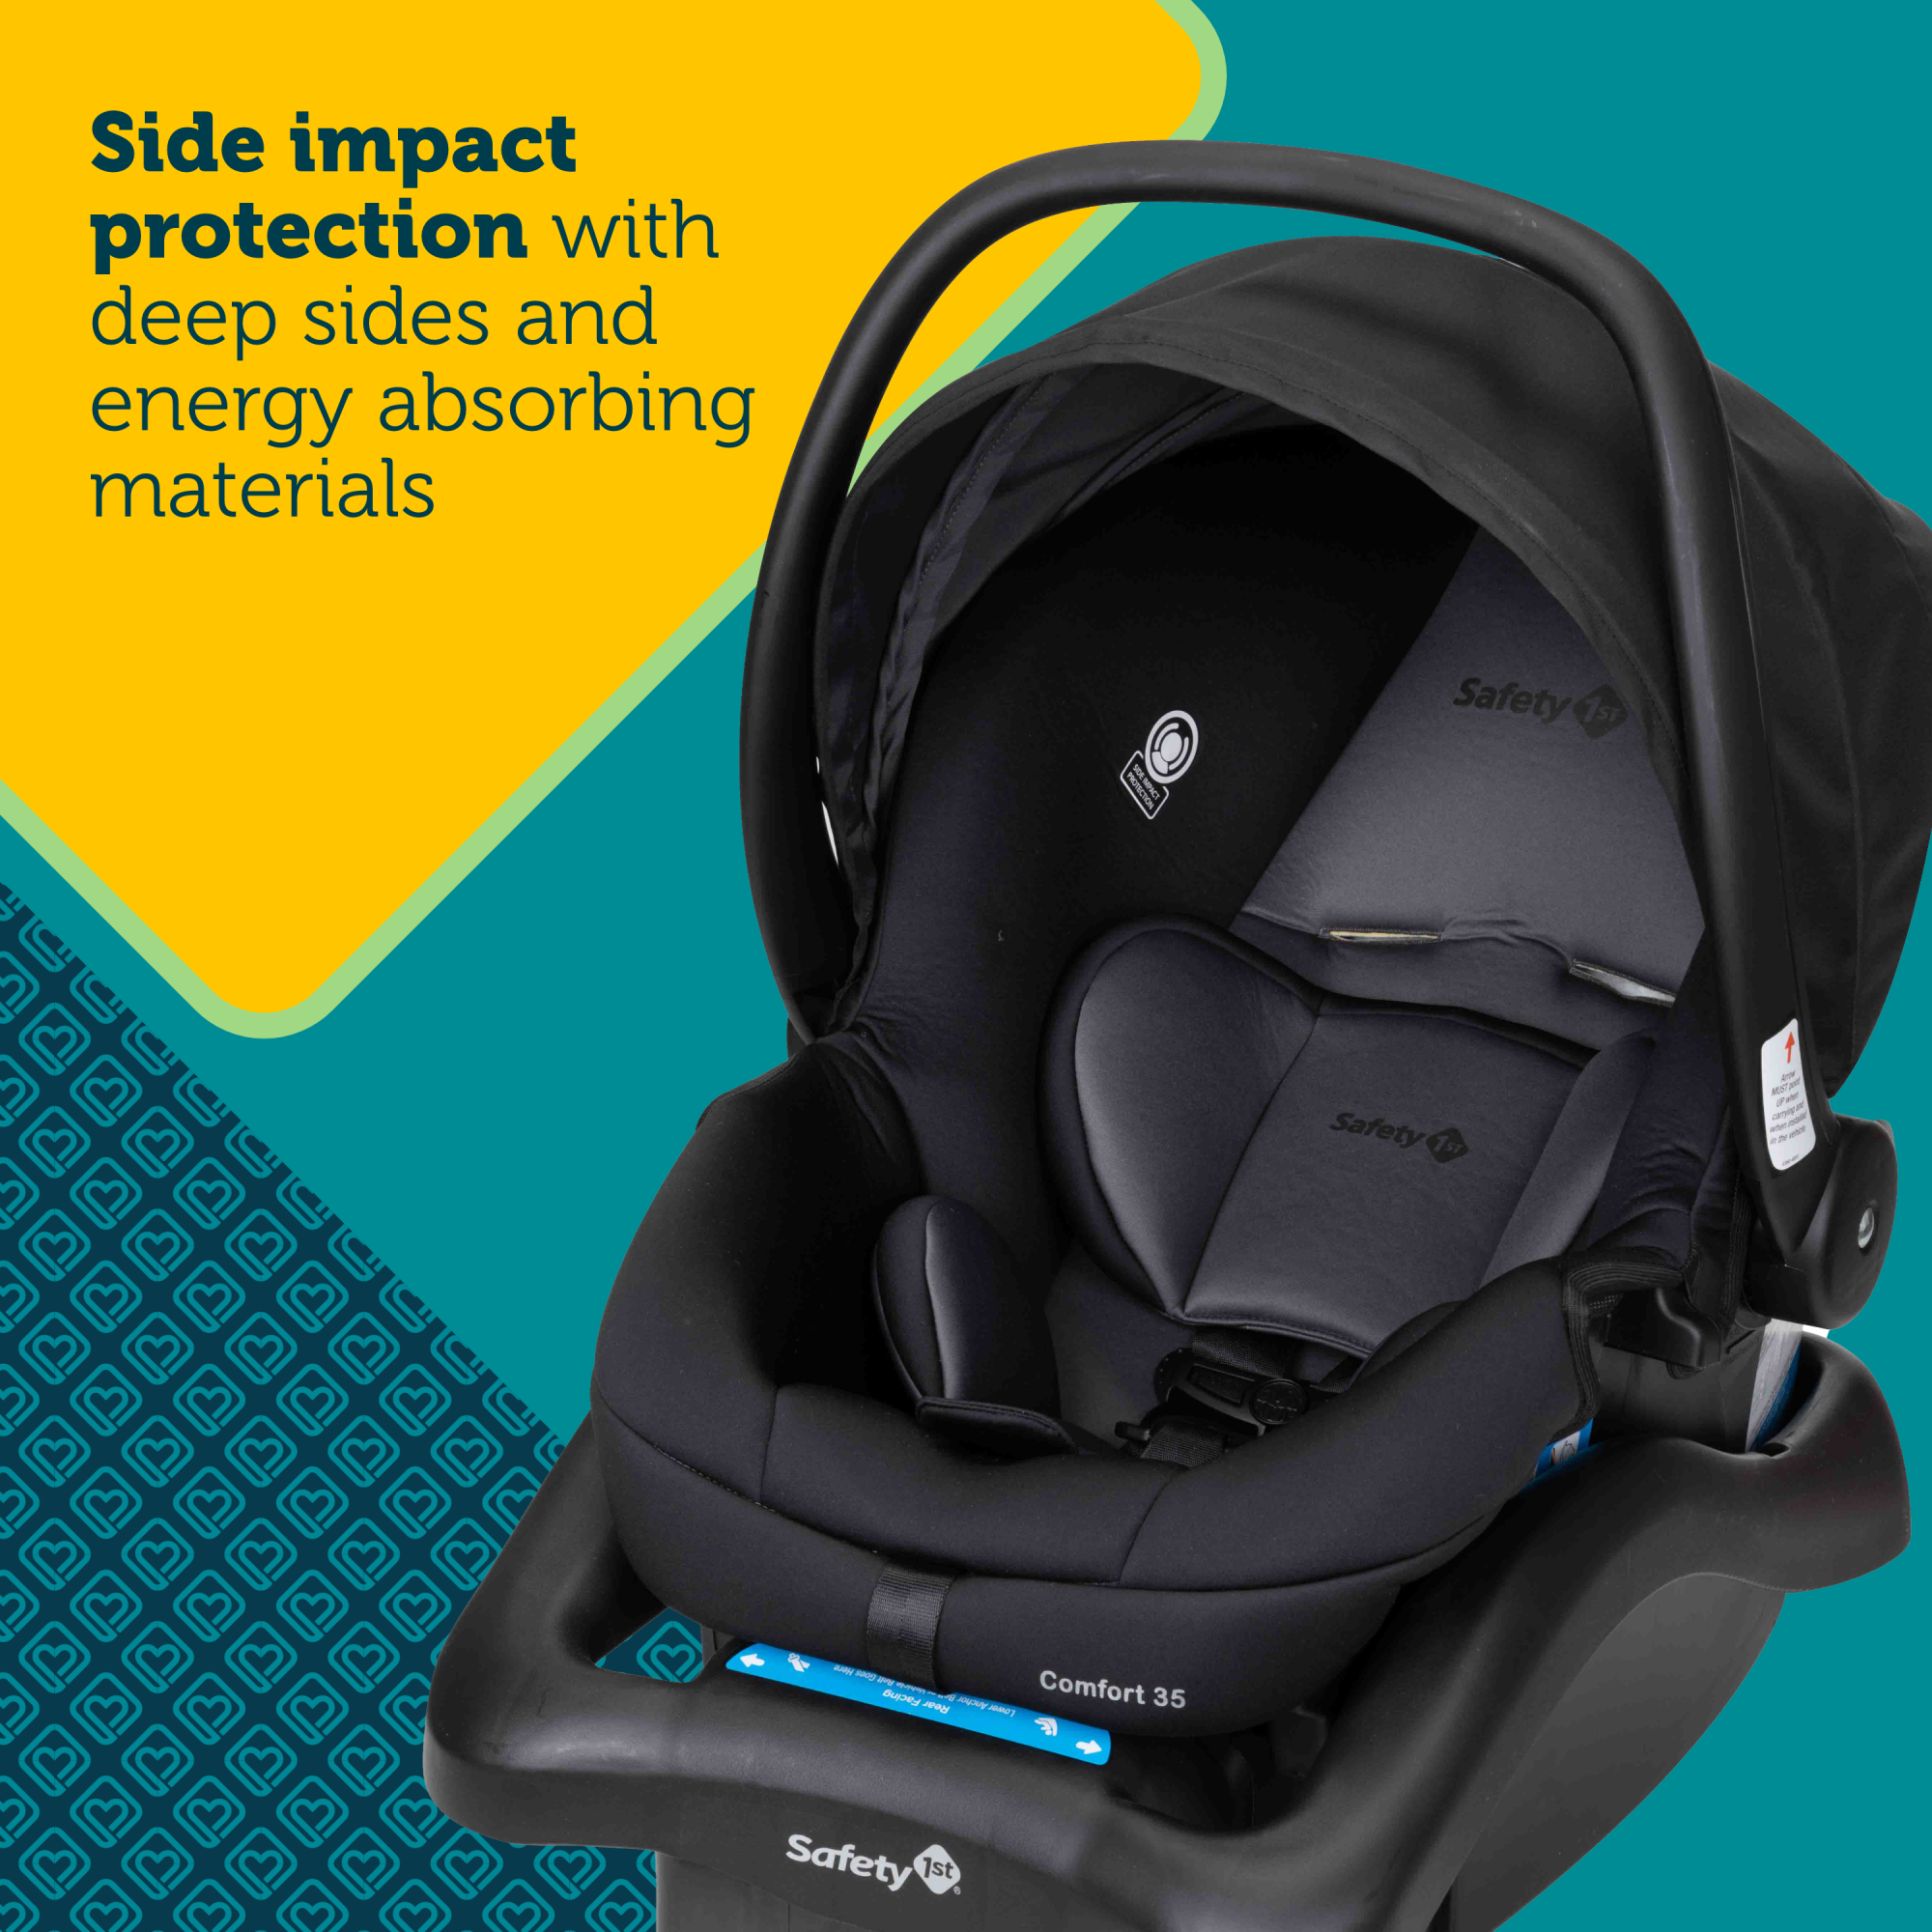 Comfort 35 Infant Car Seat - side impact protection with deep sides and energy absorbing materials